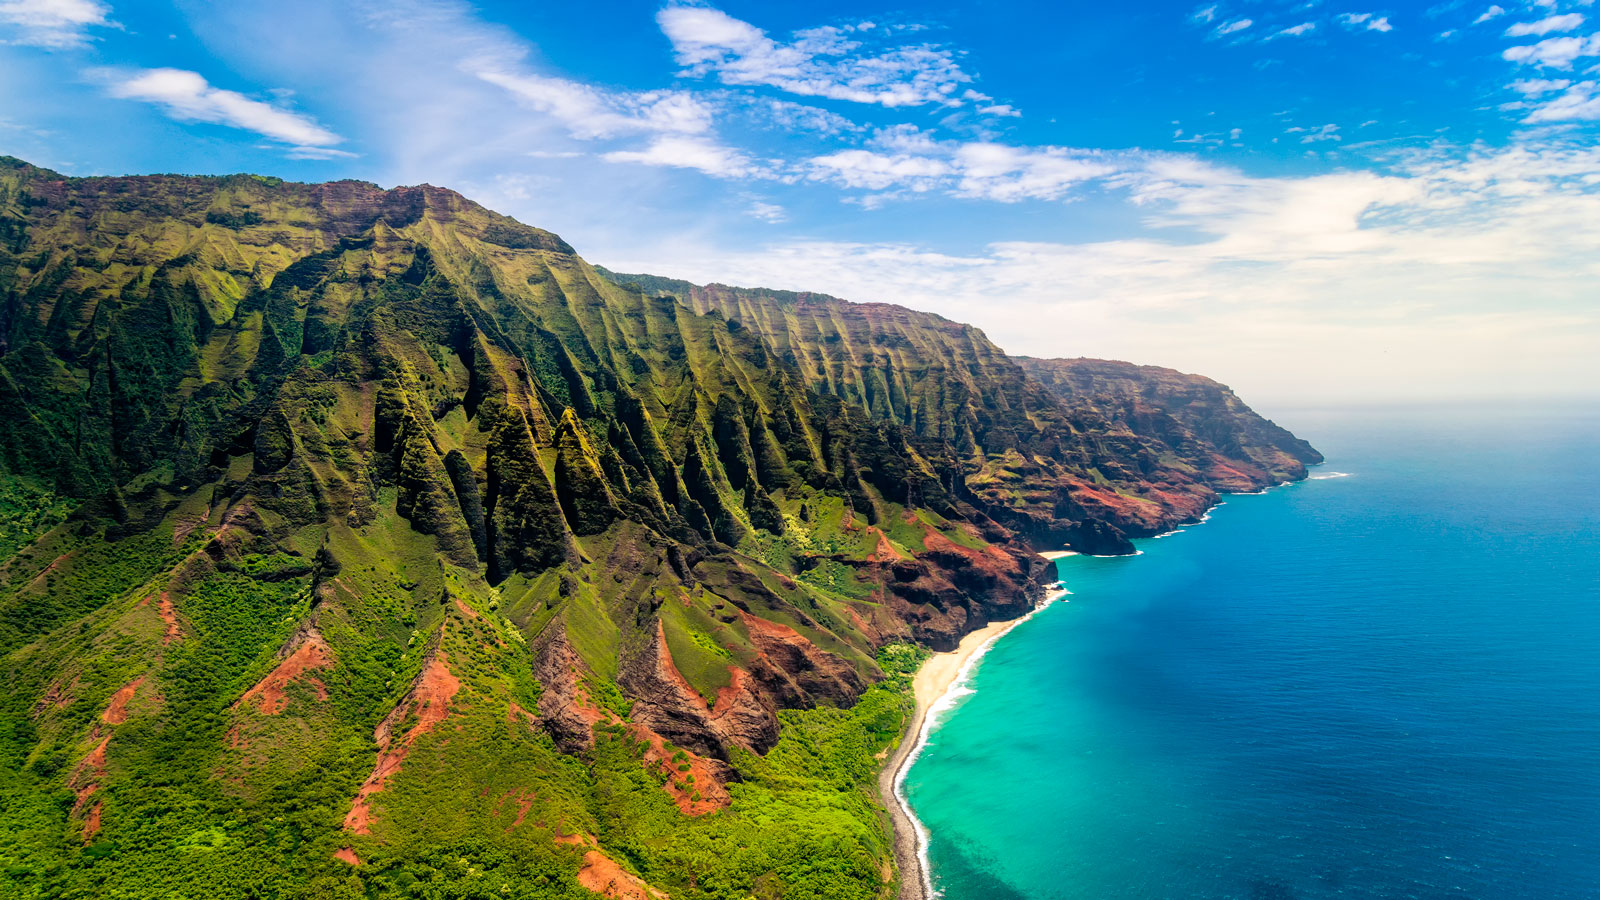 Not Even Masters of General Knowledge Can Get a Perfect Score on This Quiz. Can You? Hawaii